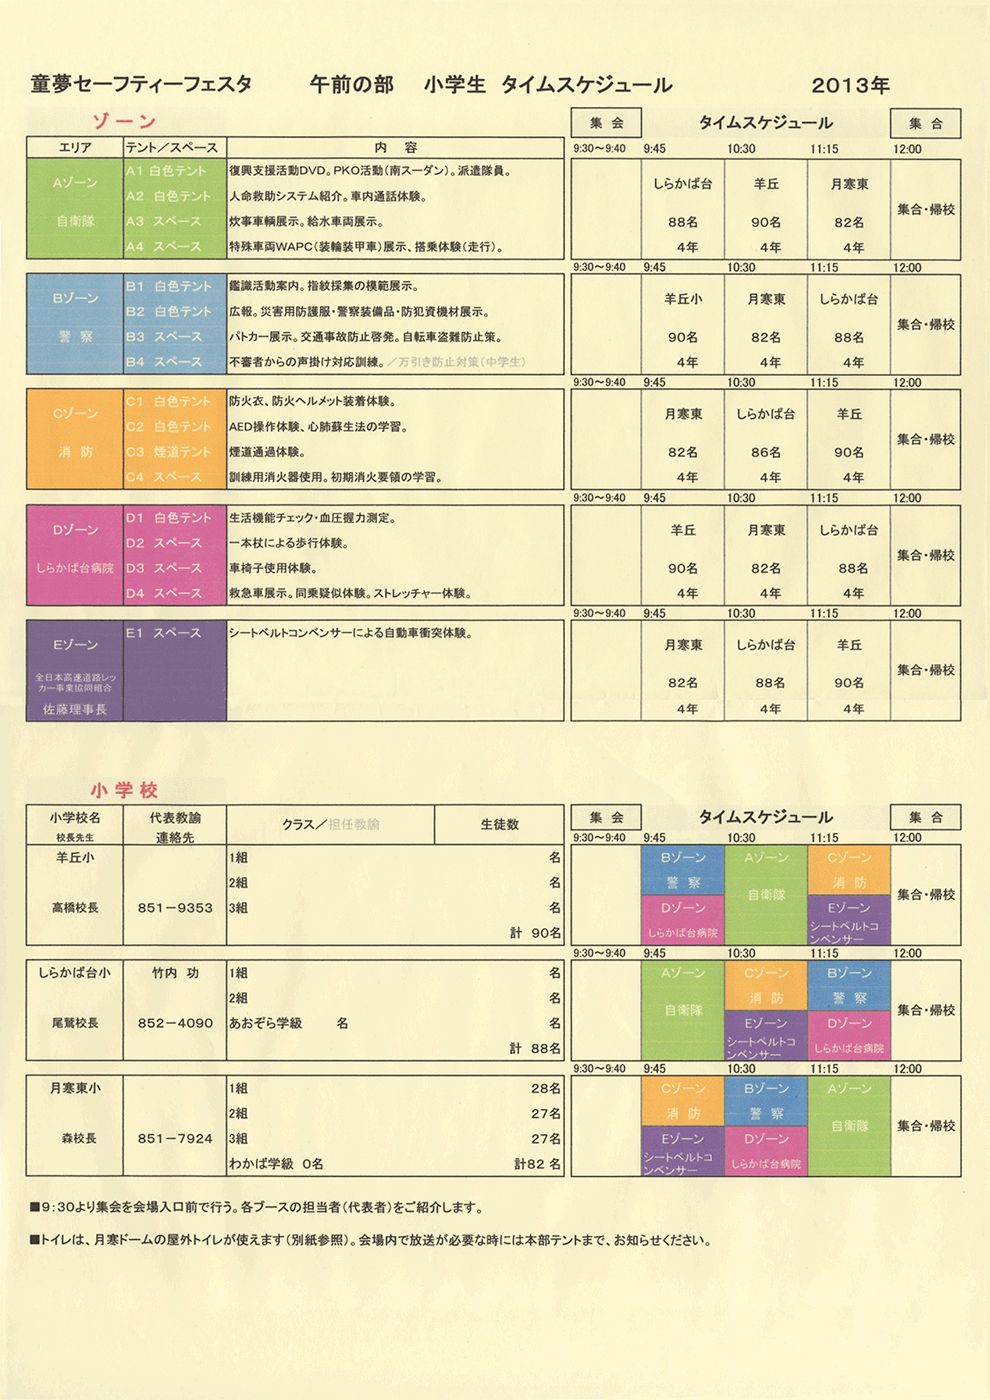 2013_time_schedule.png